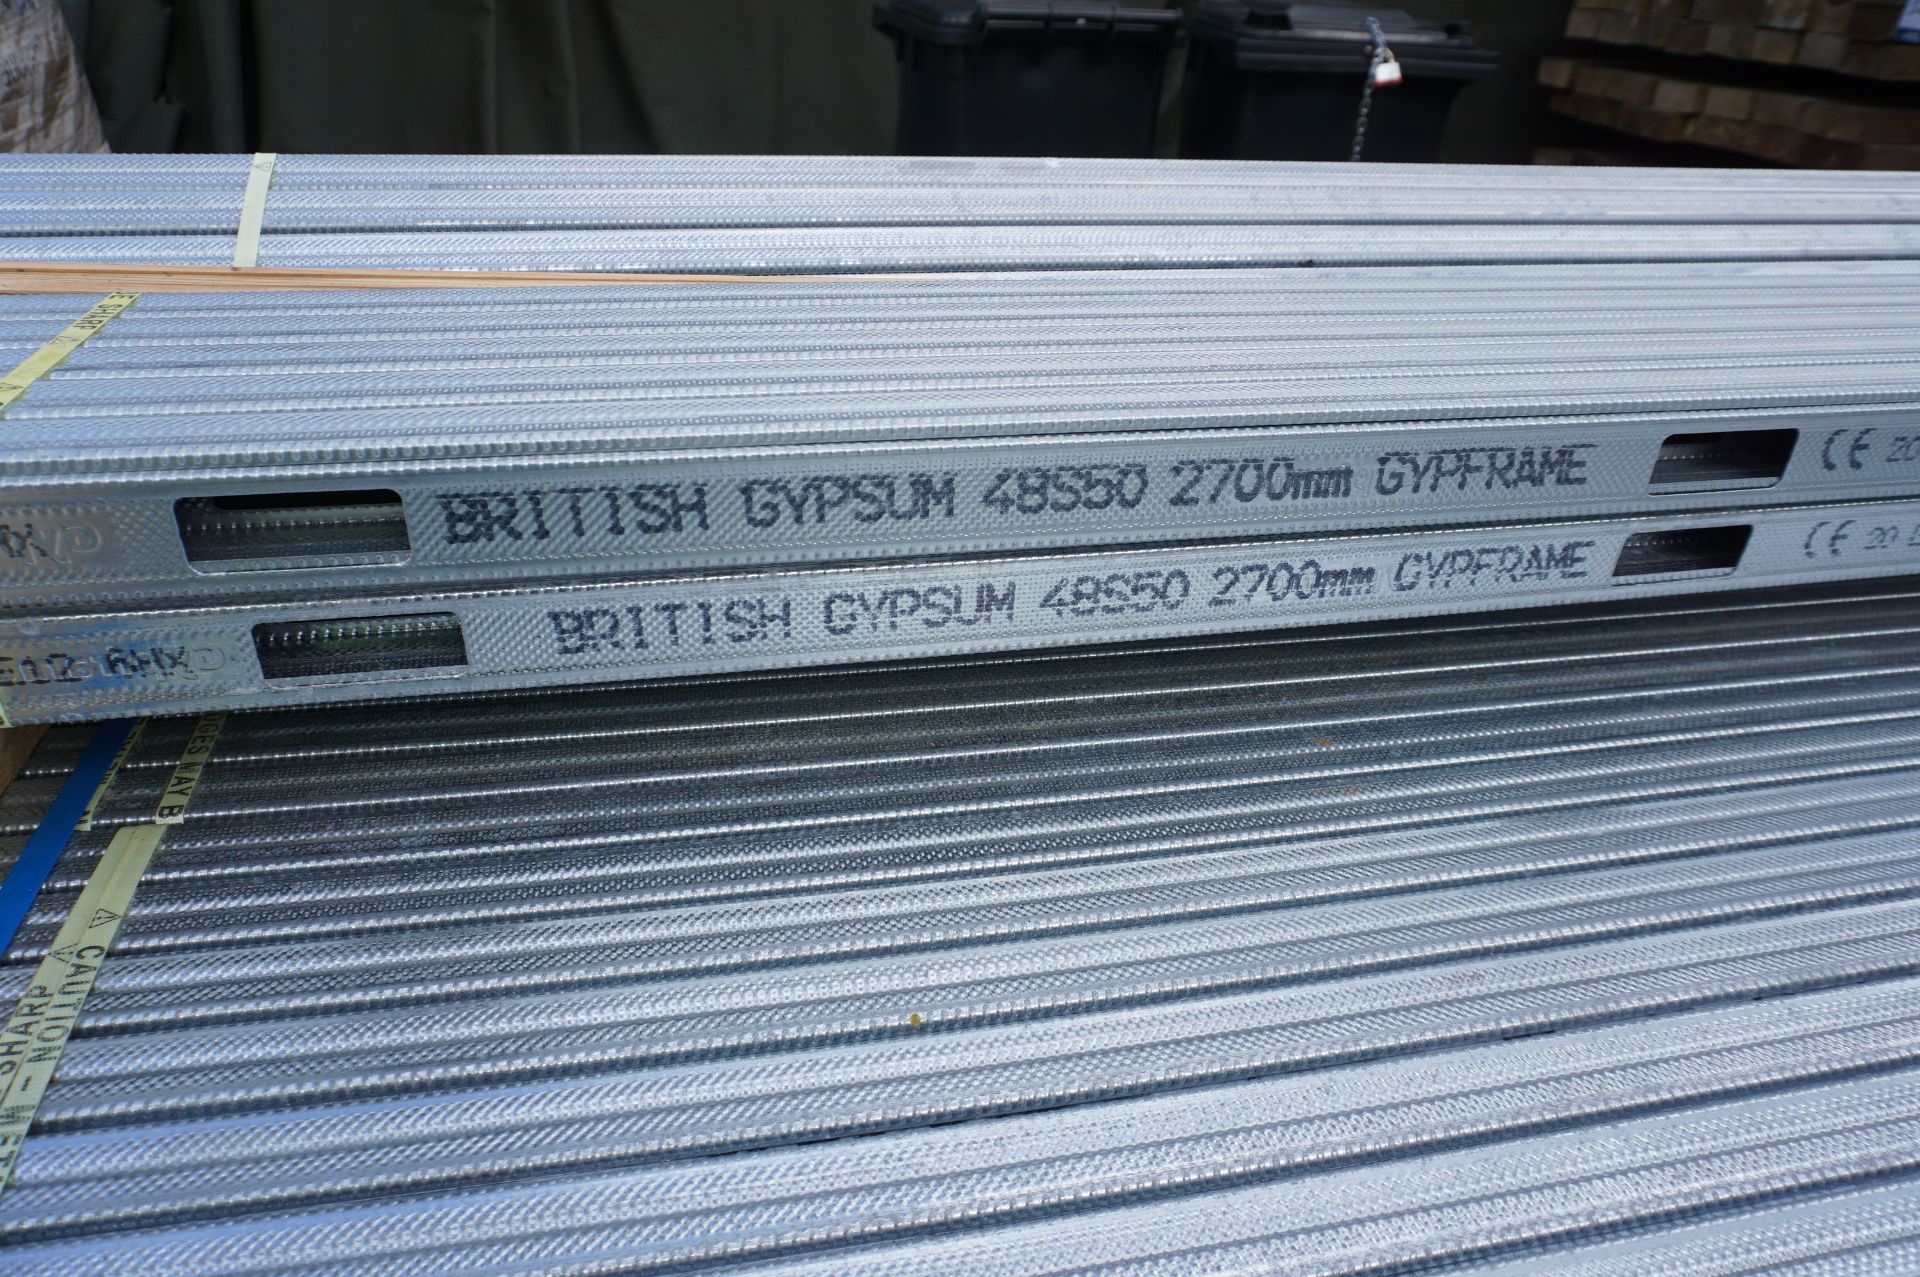 Large quantity of British Gypsum plasterboard components to include: 250x (no.) 48S50 x 2700mm and - Image 6 of 8